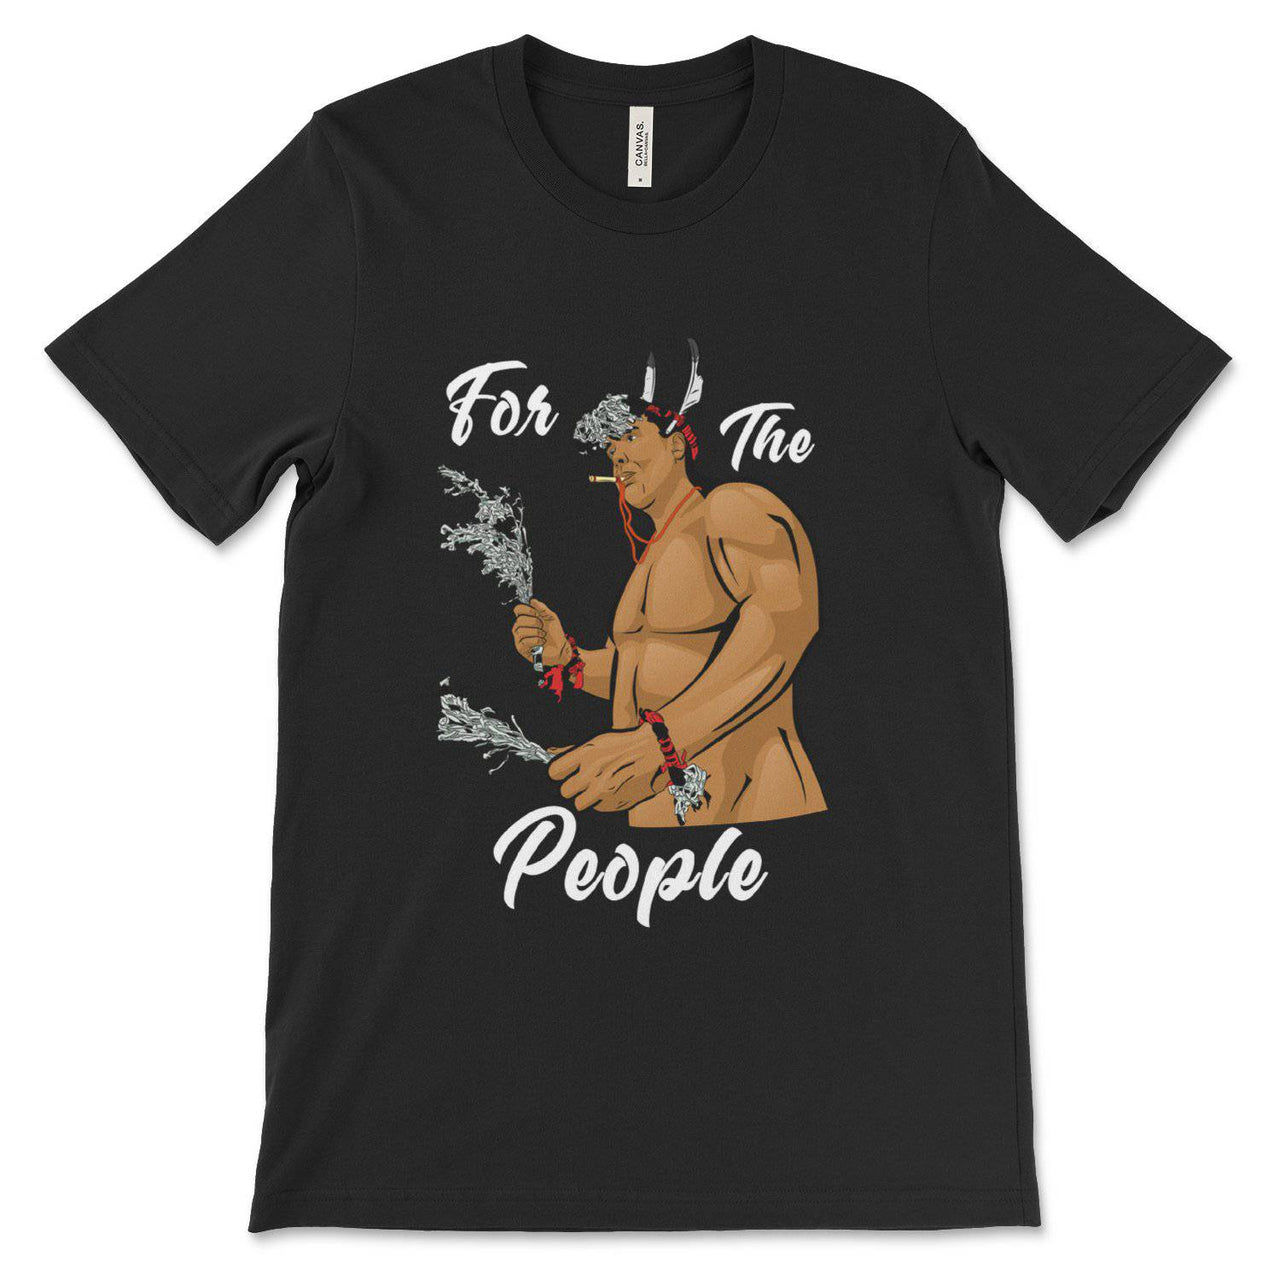 For The People Tee